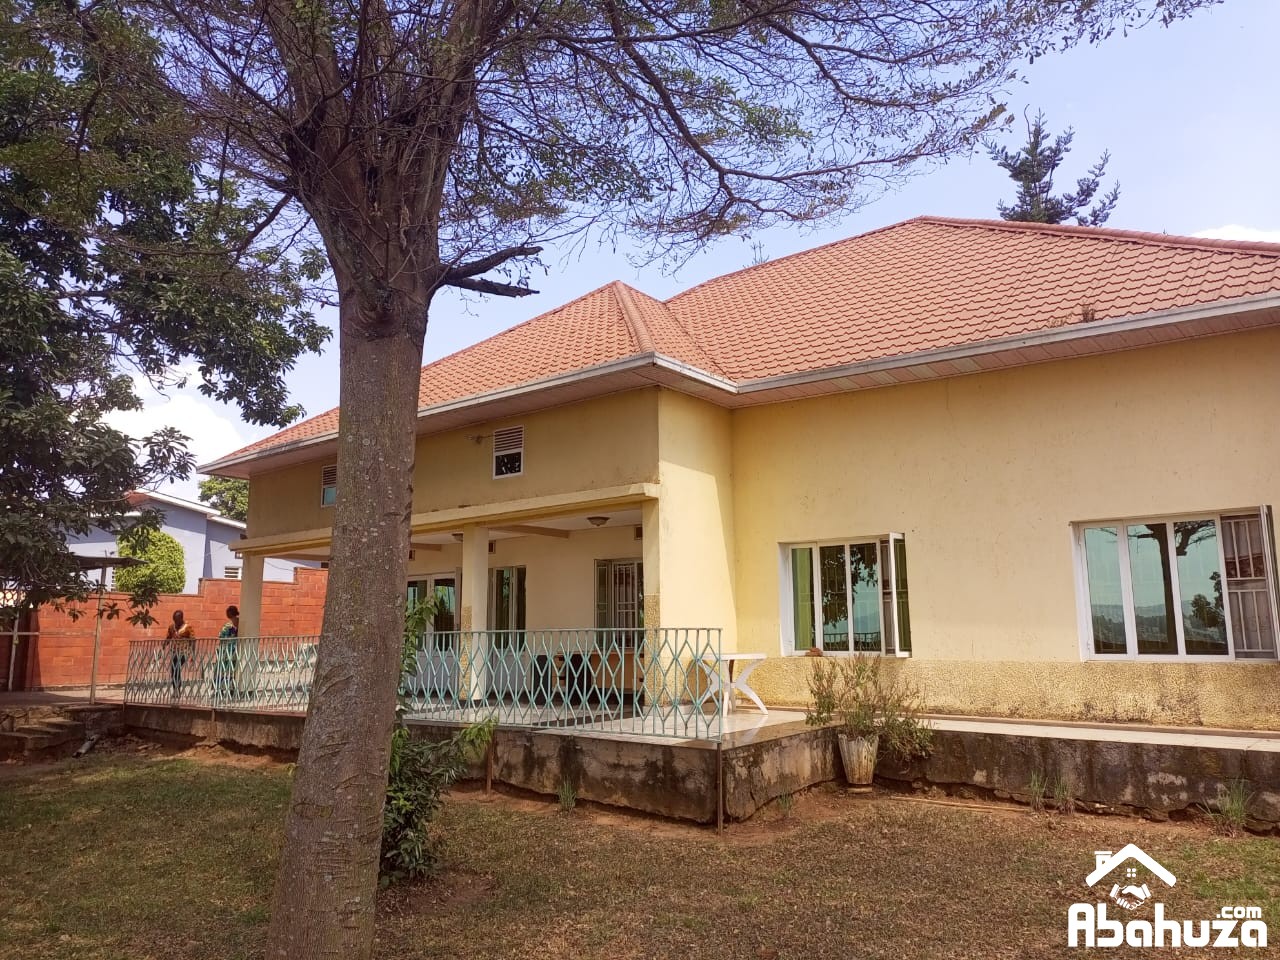 A 6 BEDROOM HOUSE FOR SALE IN KIGALI AT NIBOYE NEAR NPD